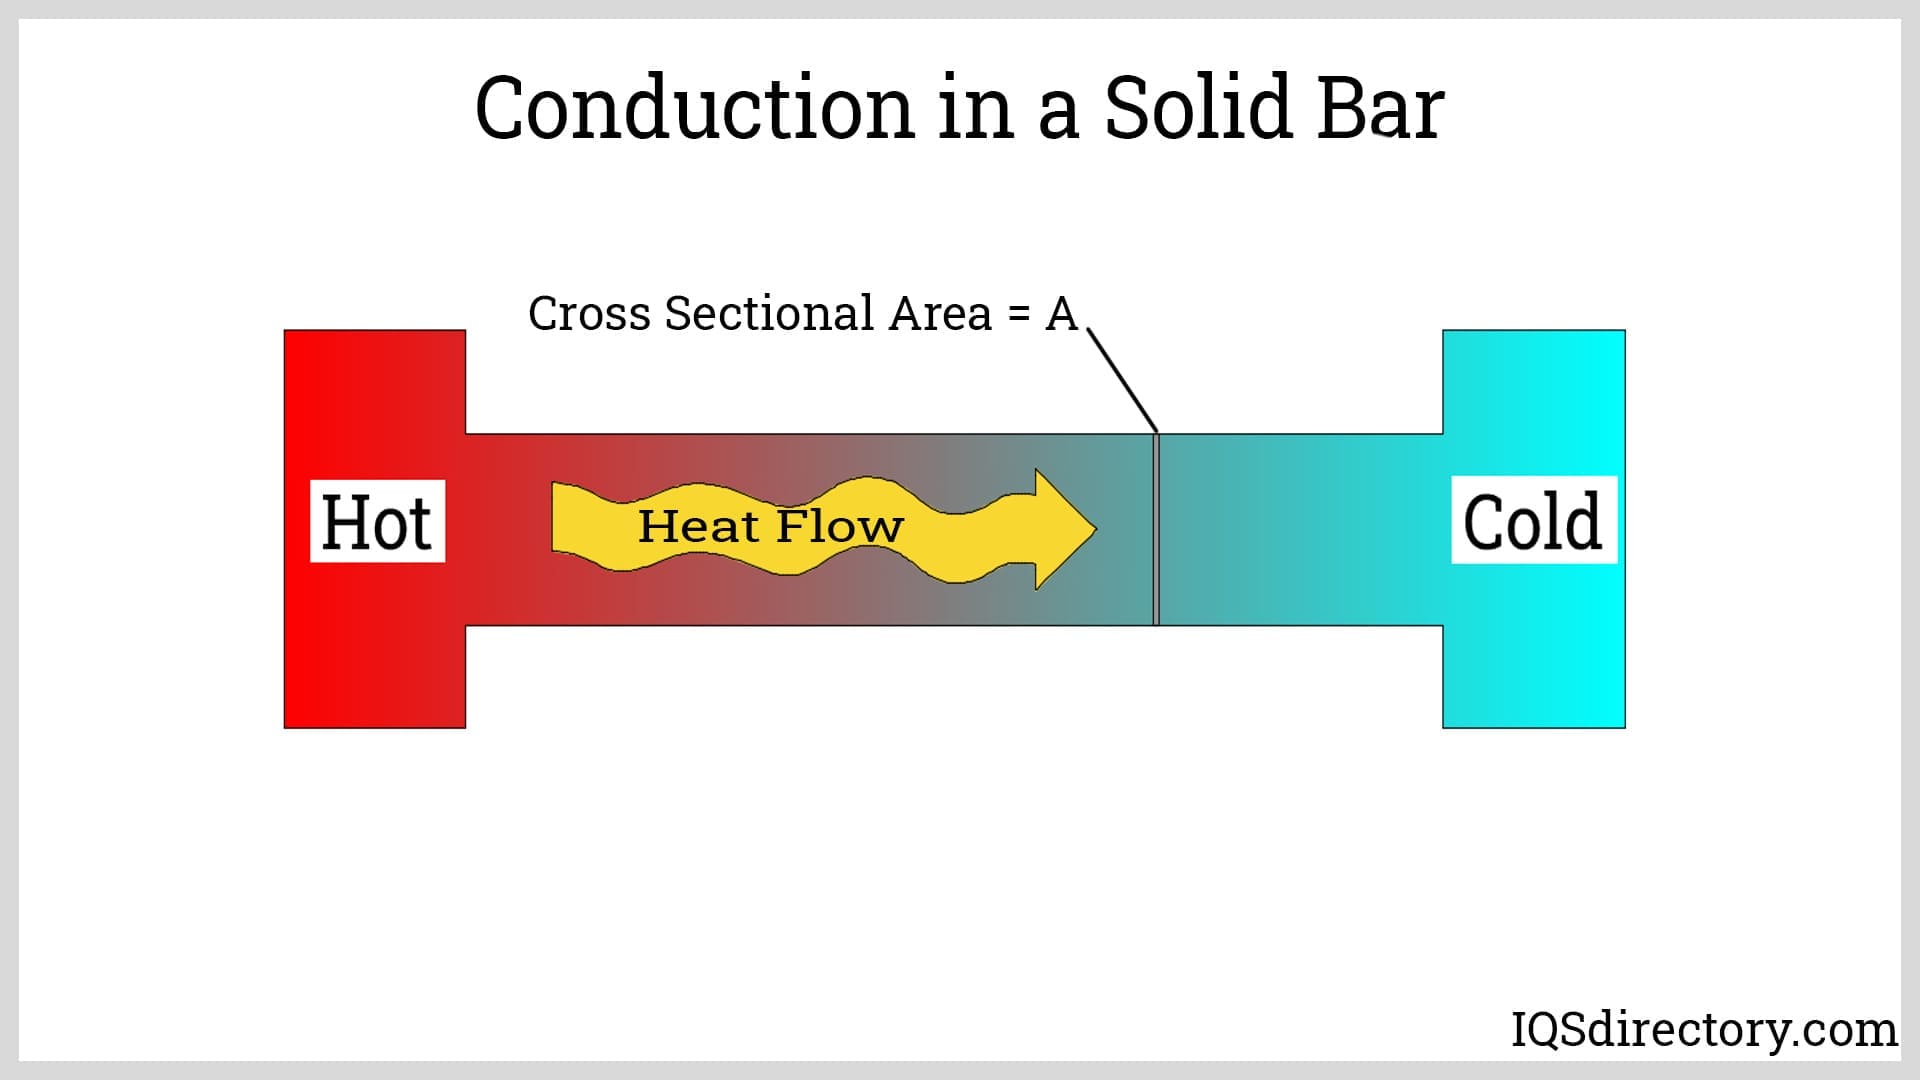 Conduction in a Solid Bar